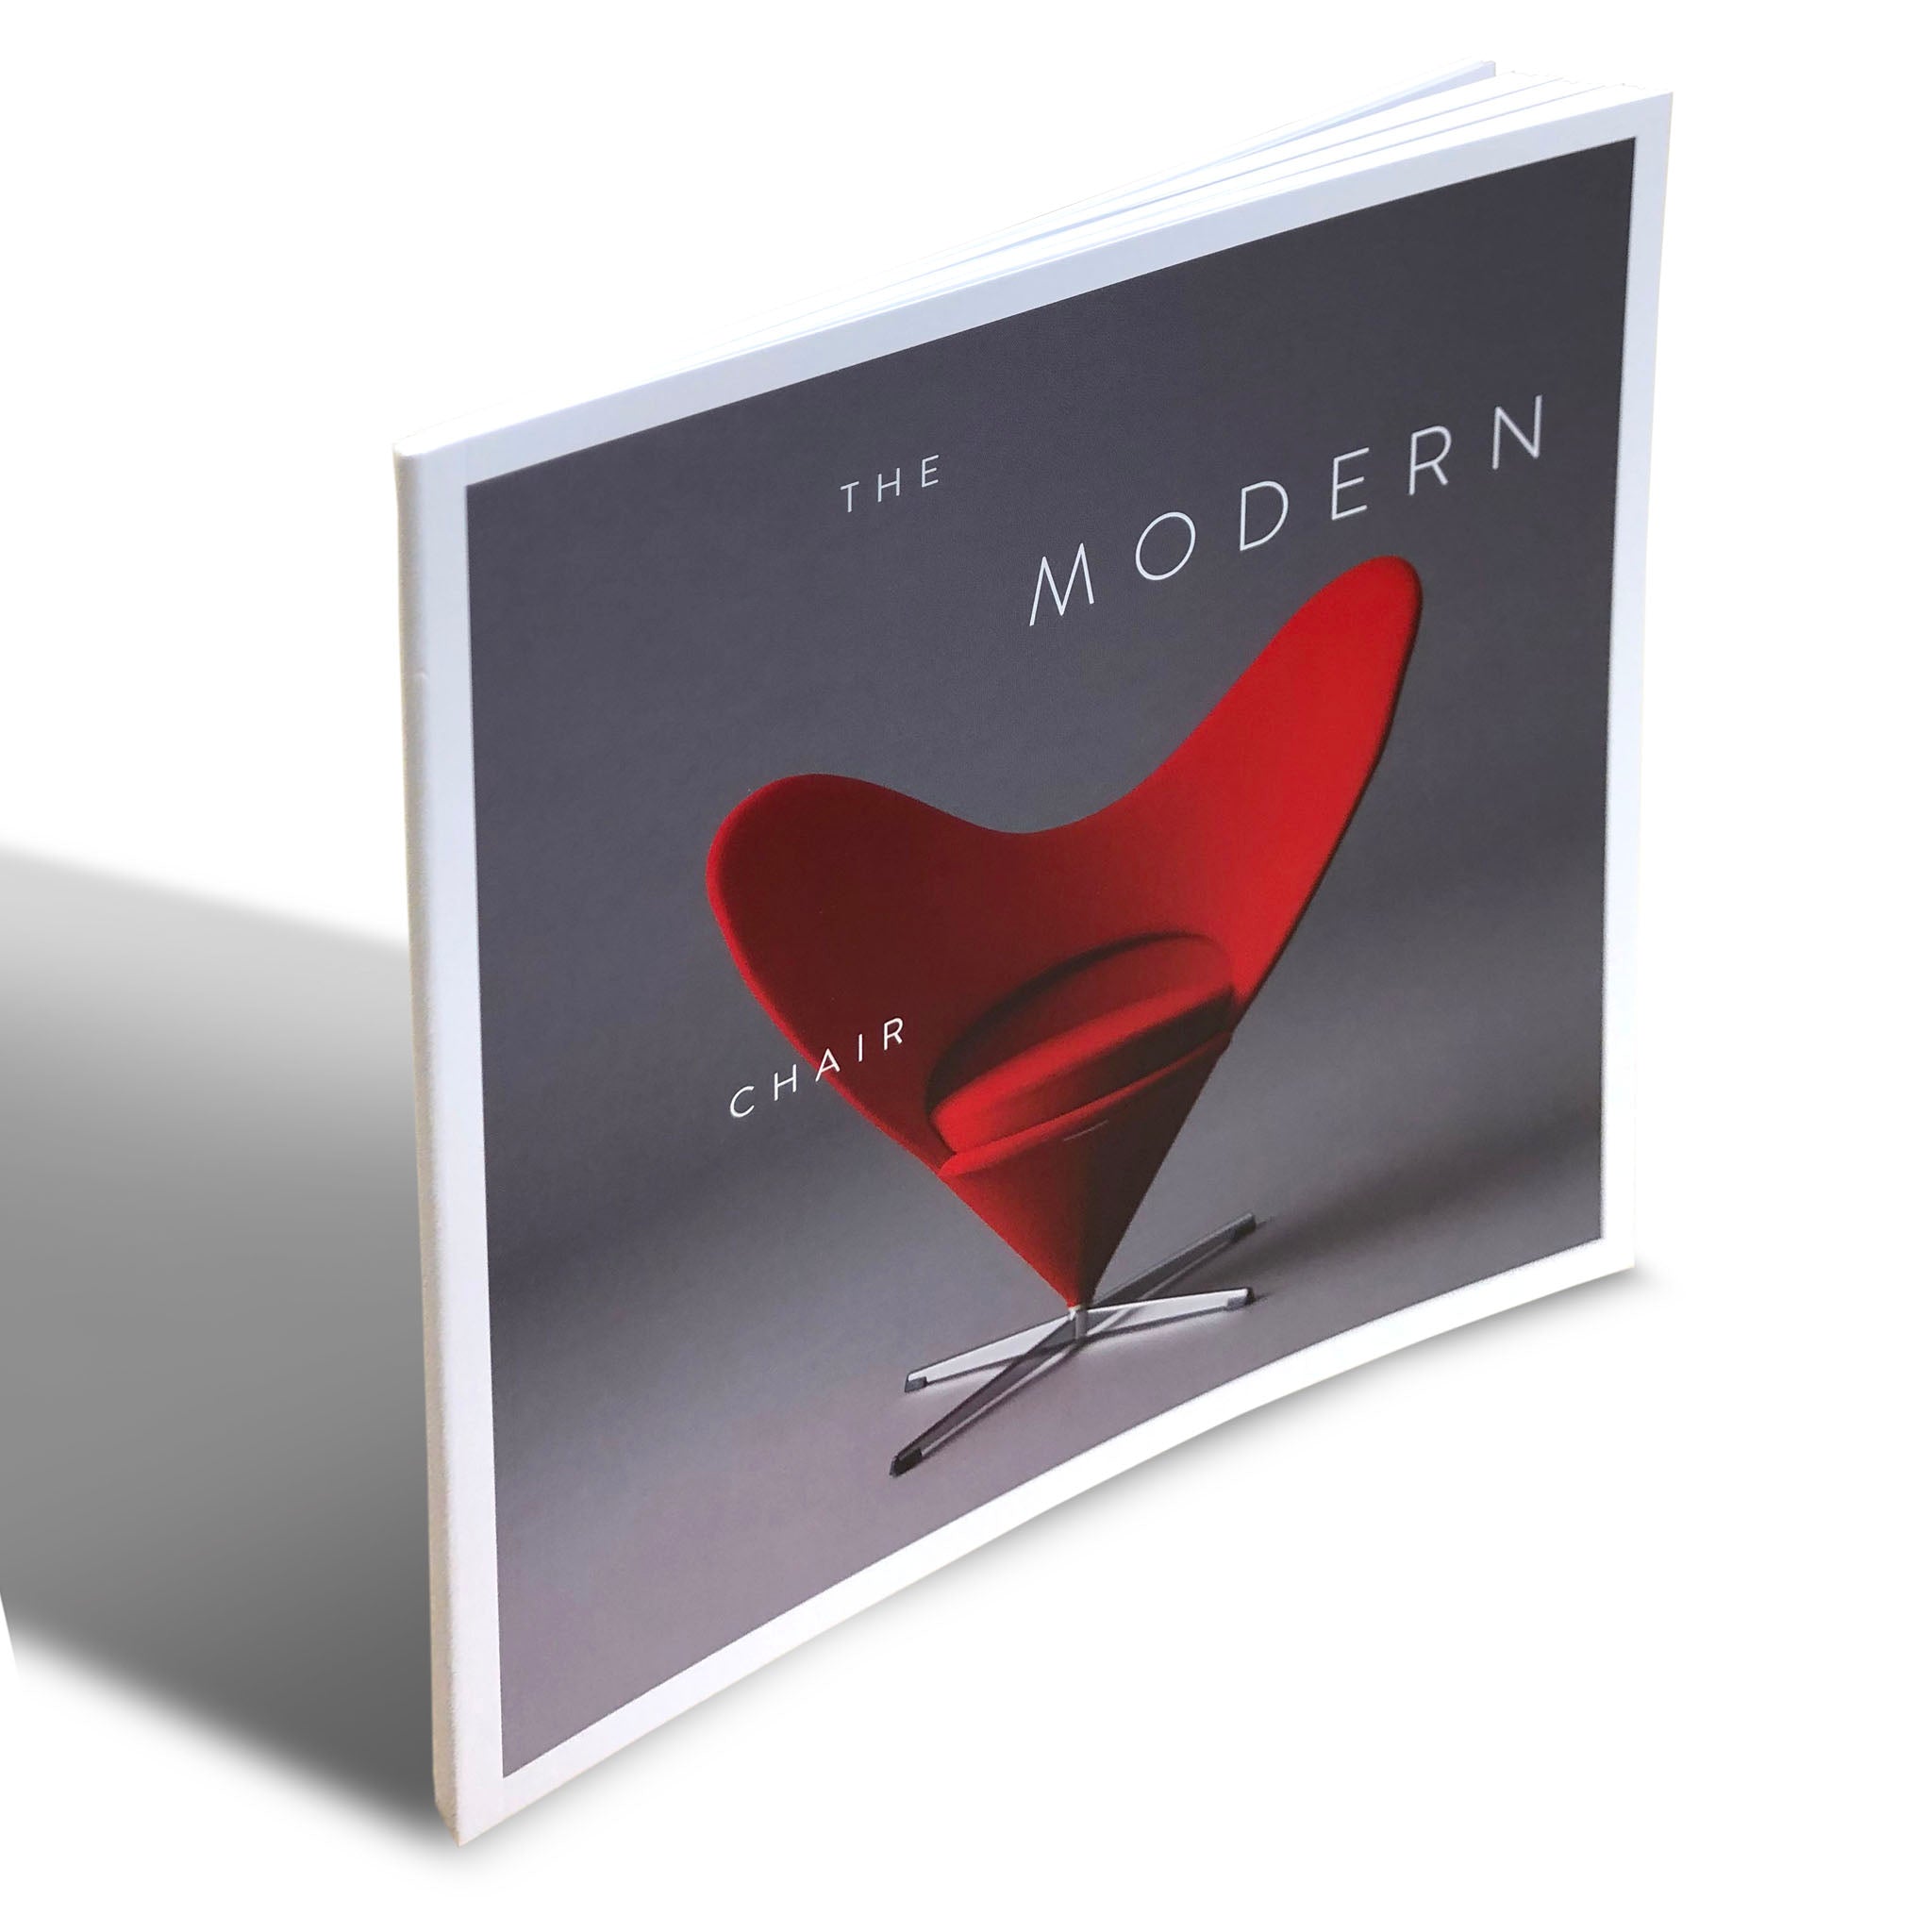 THE MODERN CHAIR INTERPRETIVE BOOK - A collector's tour to 60 chairs